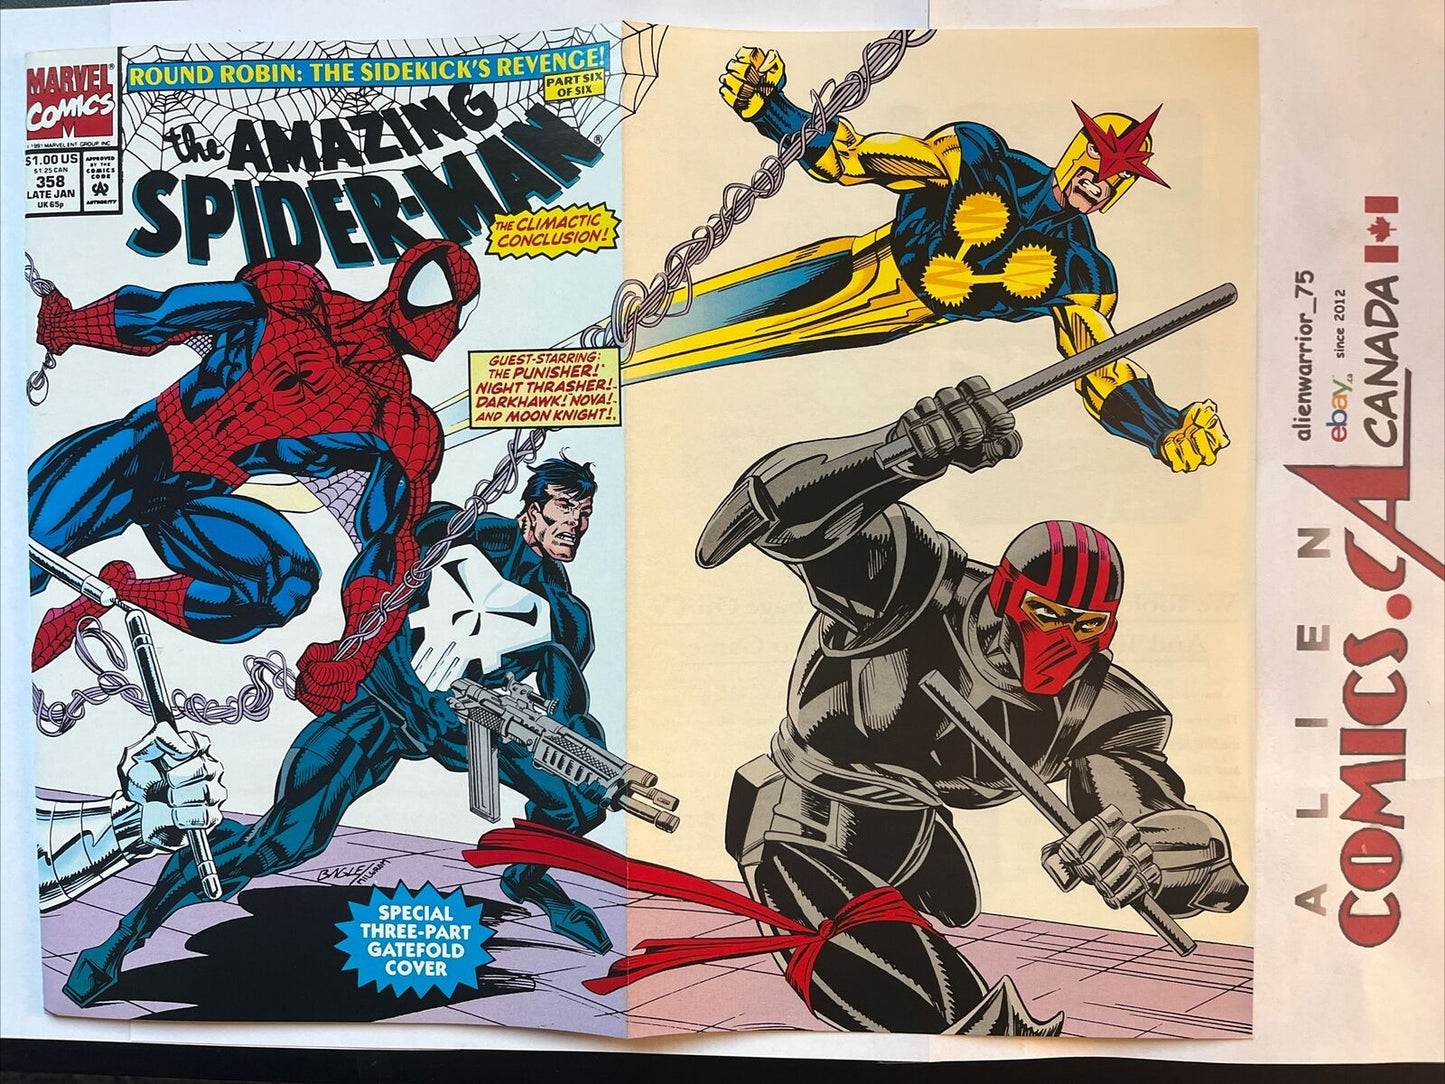 AMAZING SPIDER-MAN 358 Marvel 1992 Last $1 Issue Fold-out Cover Rare HIGH GRADE